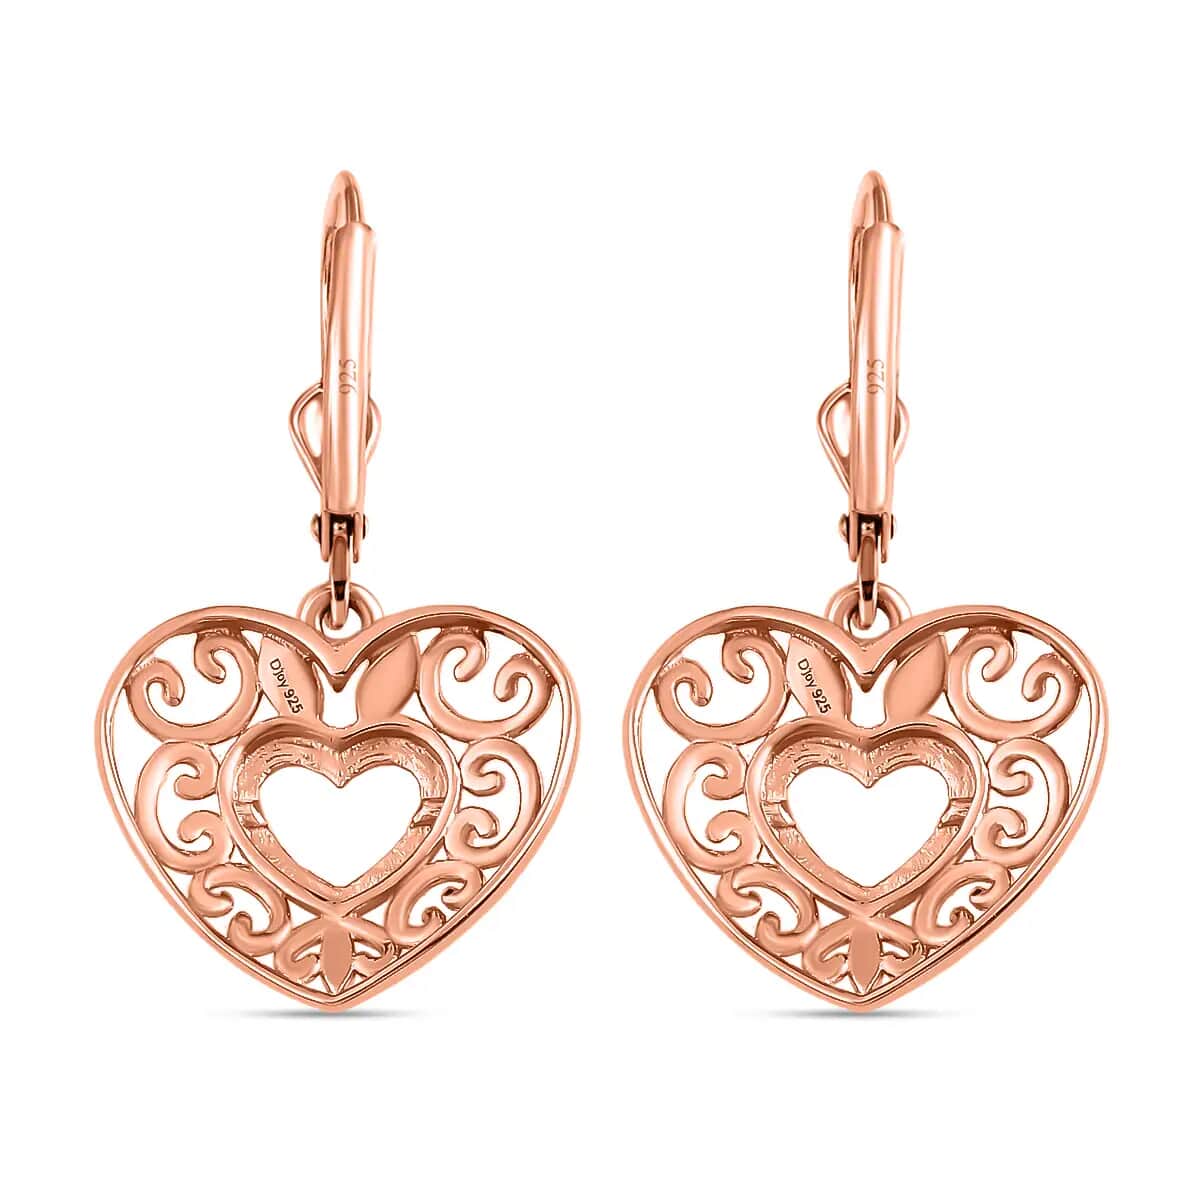 Mother’s Day Gift Openwork Earrings, Filigree Earrings, Lever Back Earrings, Drop Earrings, 14K Rose Gold Plated Sterling Silver Earrings, Heart Earrings For Women, Jewelry Gifts For Birthday image number 4